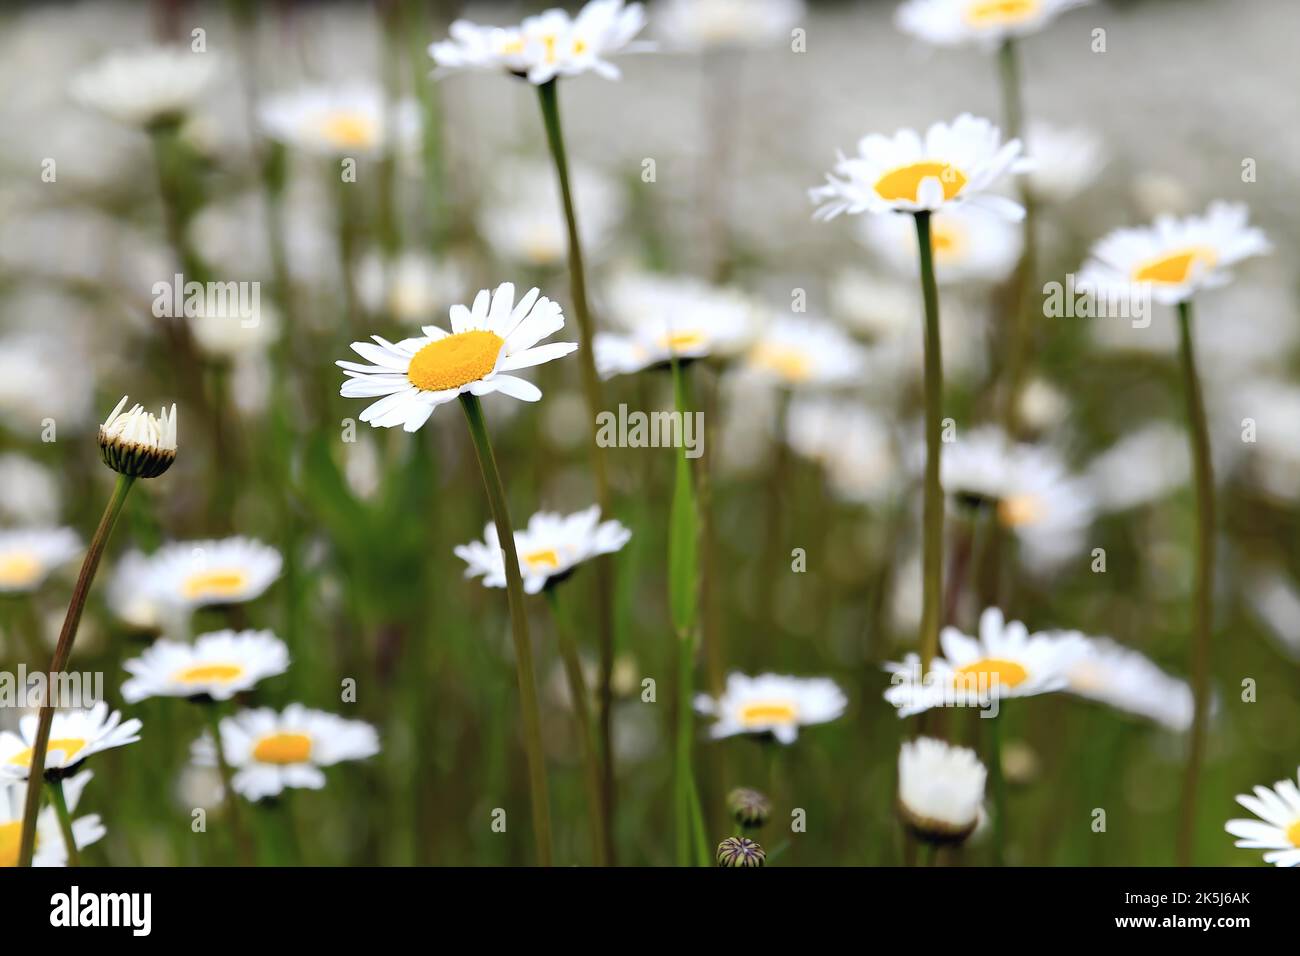 Flower meadow from the frog's perspective from below. Daisies cut out against the blue sky Stock Photo